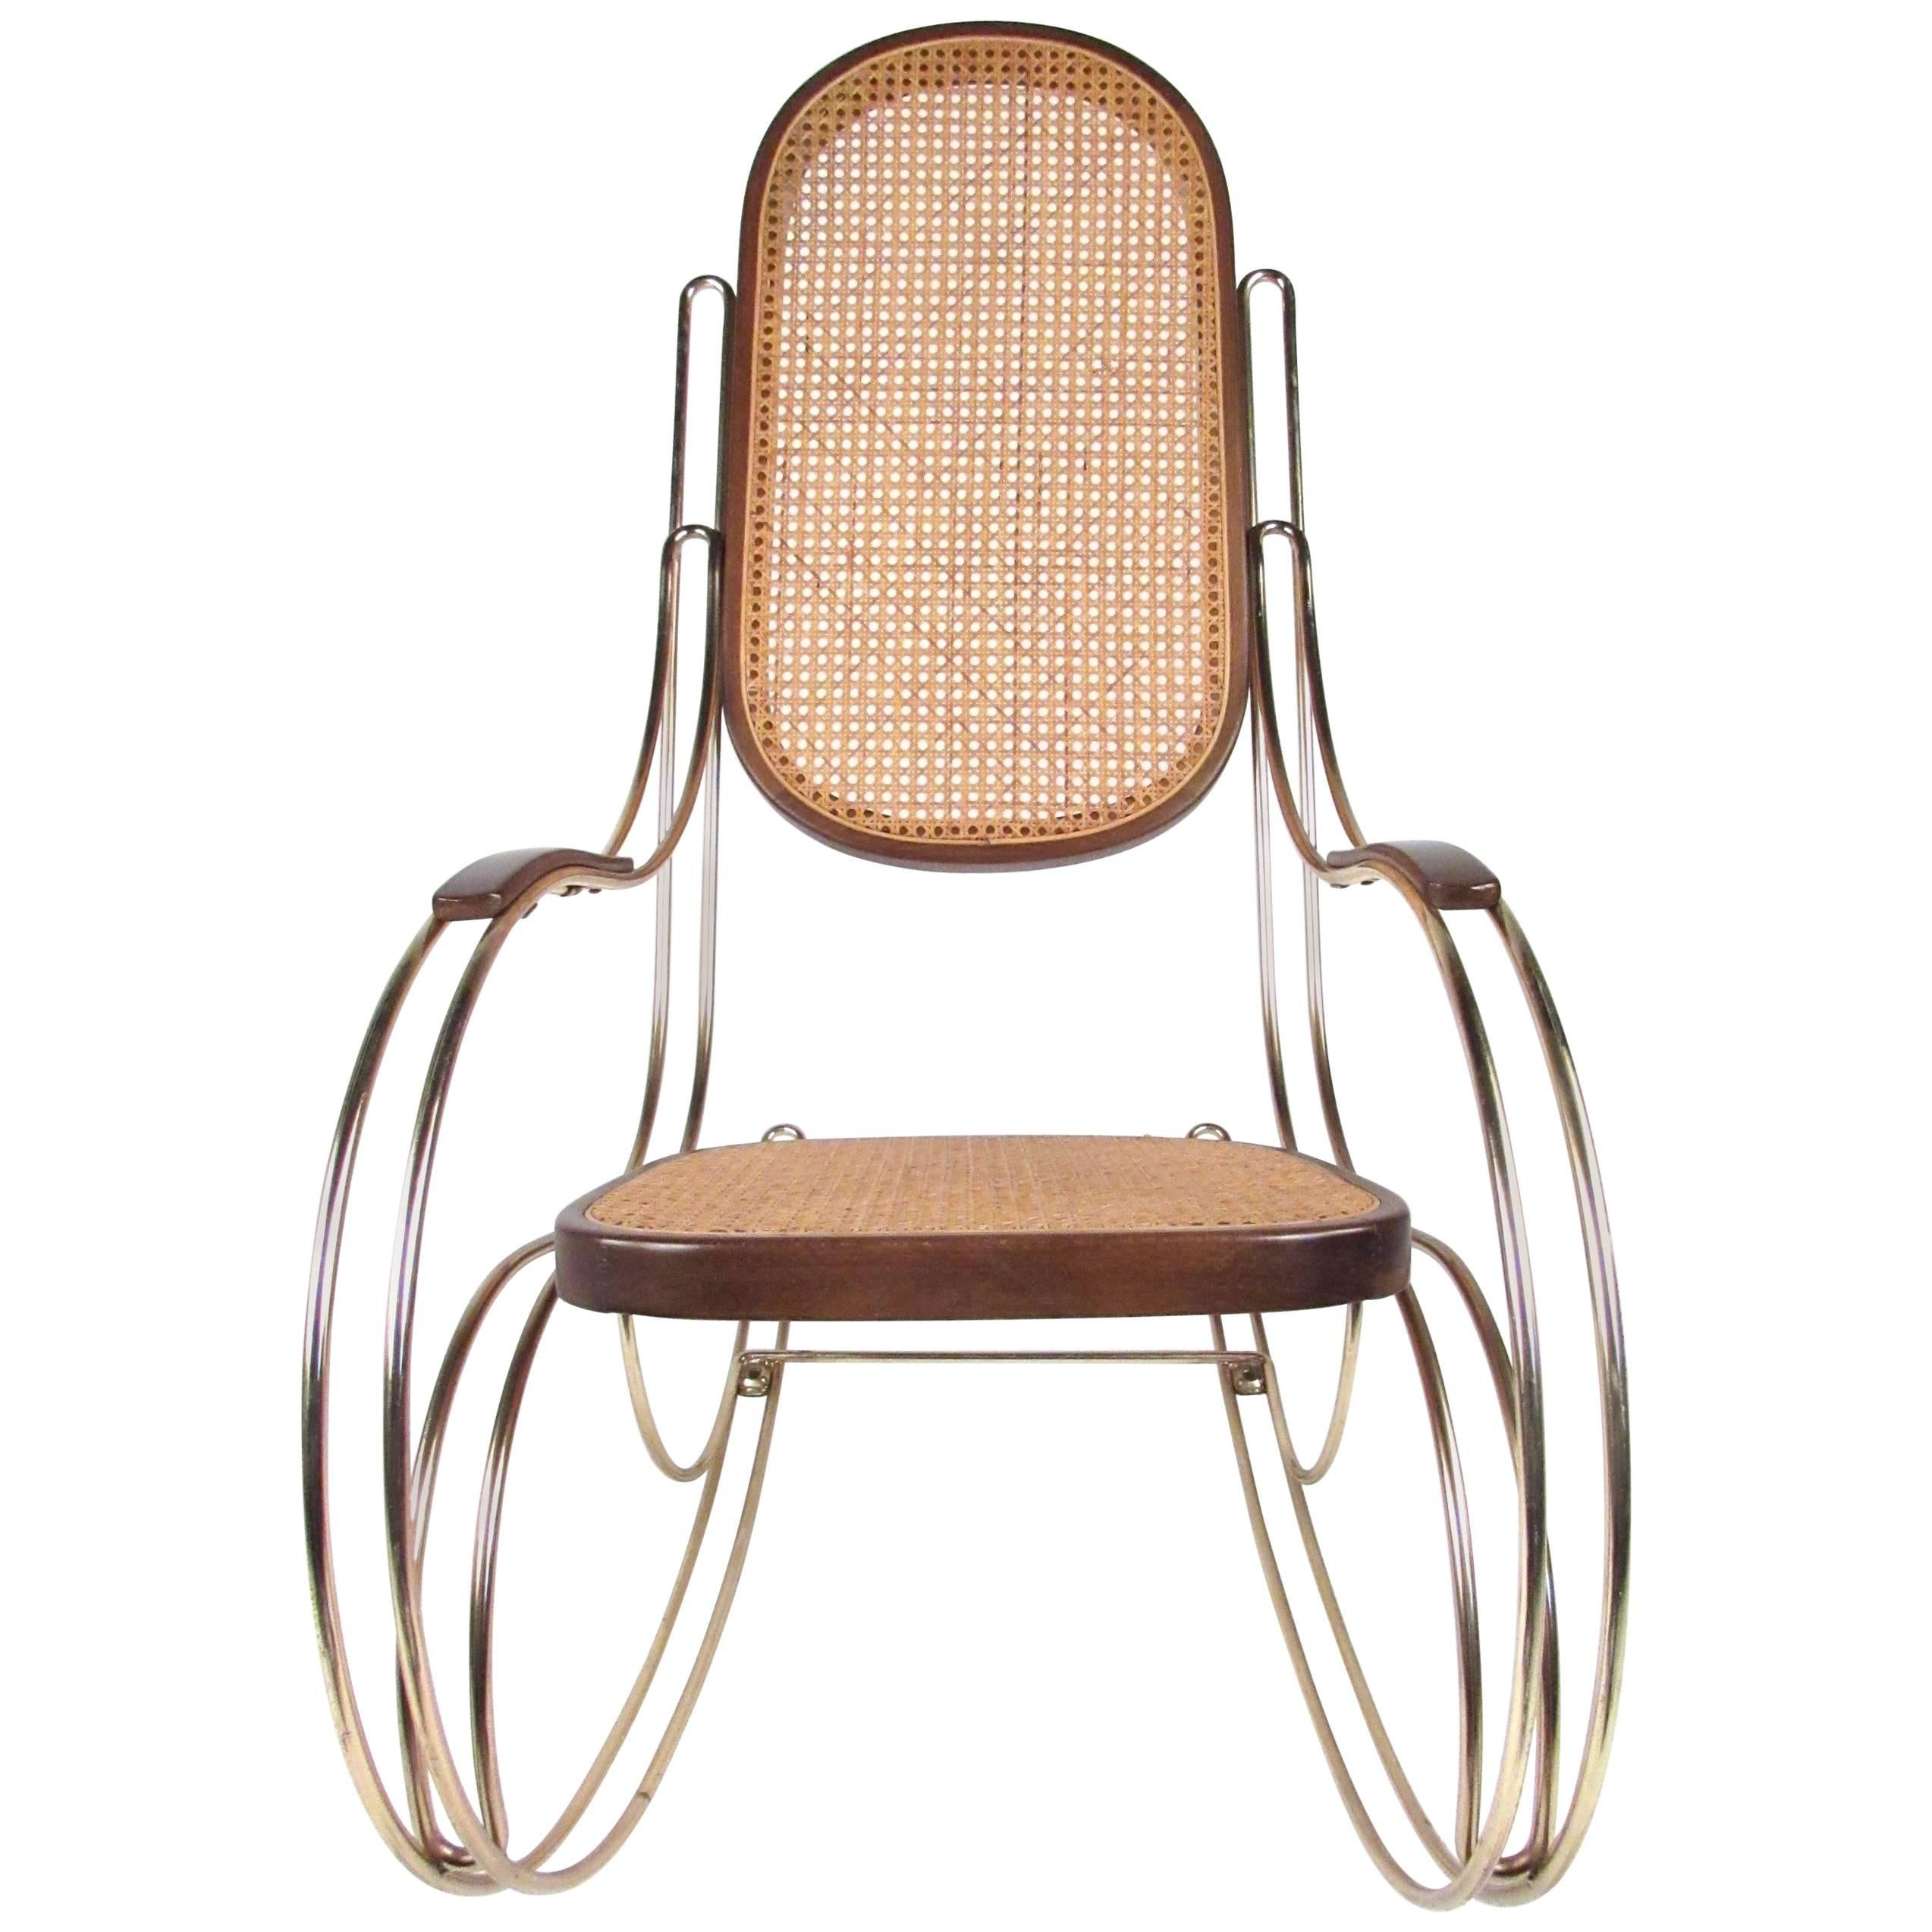 Italian Brass and Cane Rocking Chair